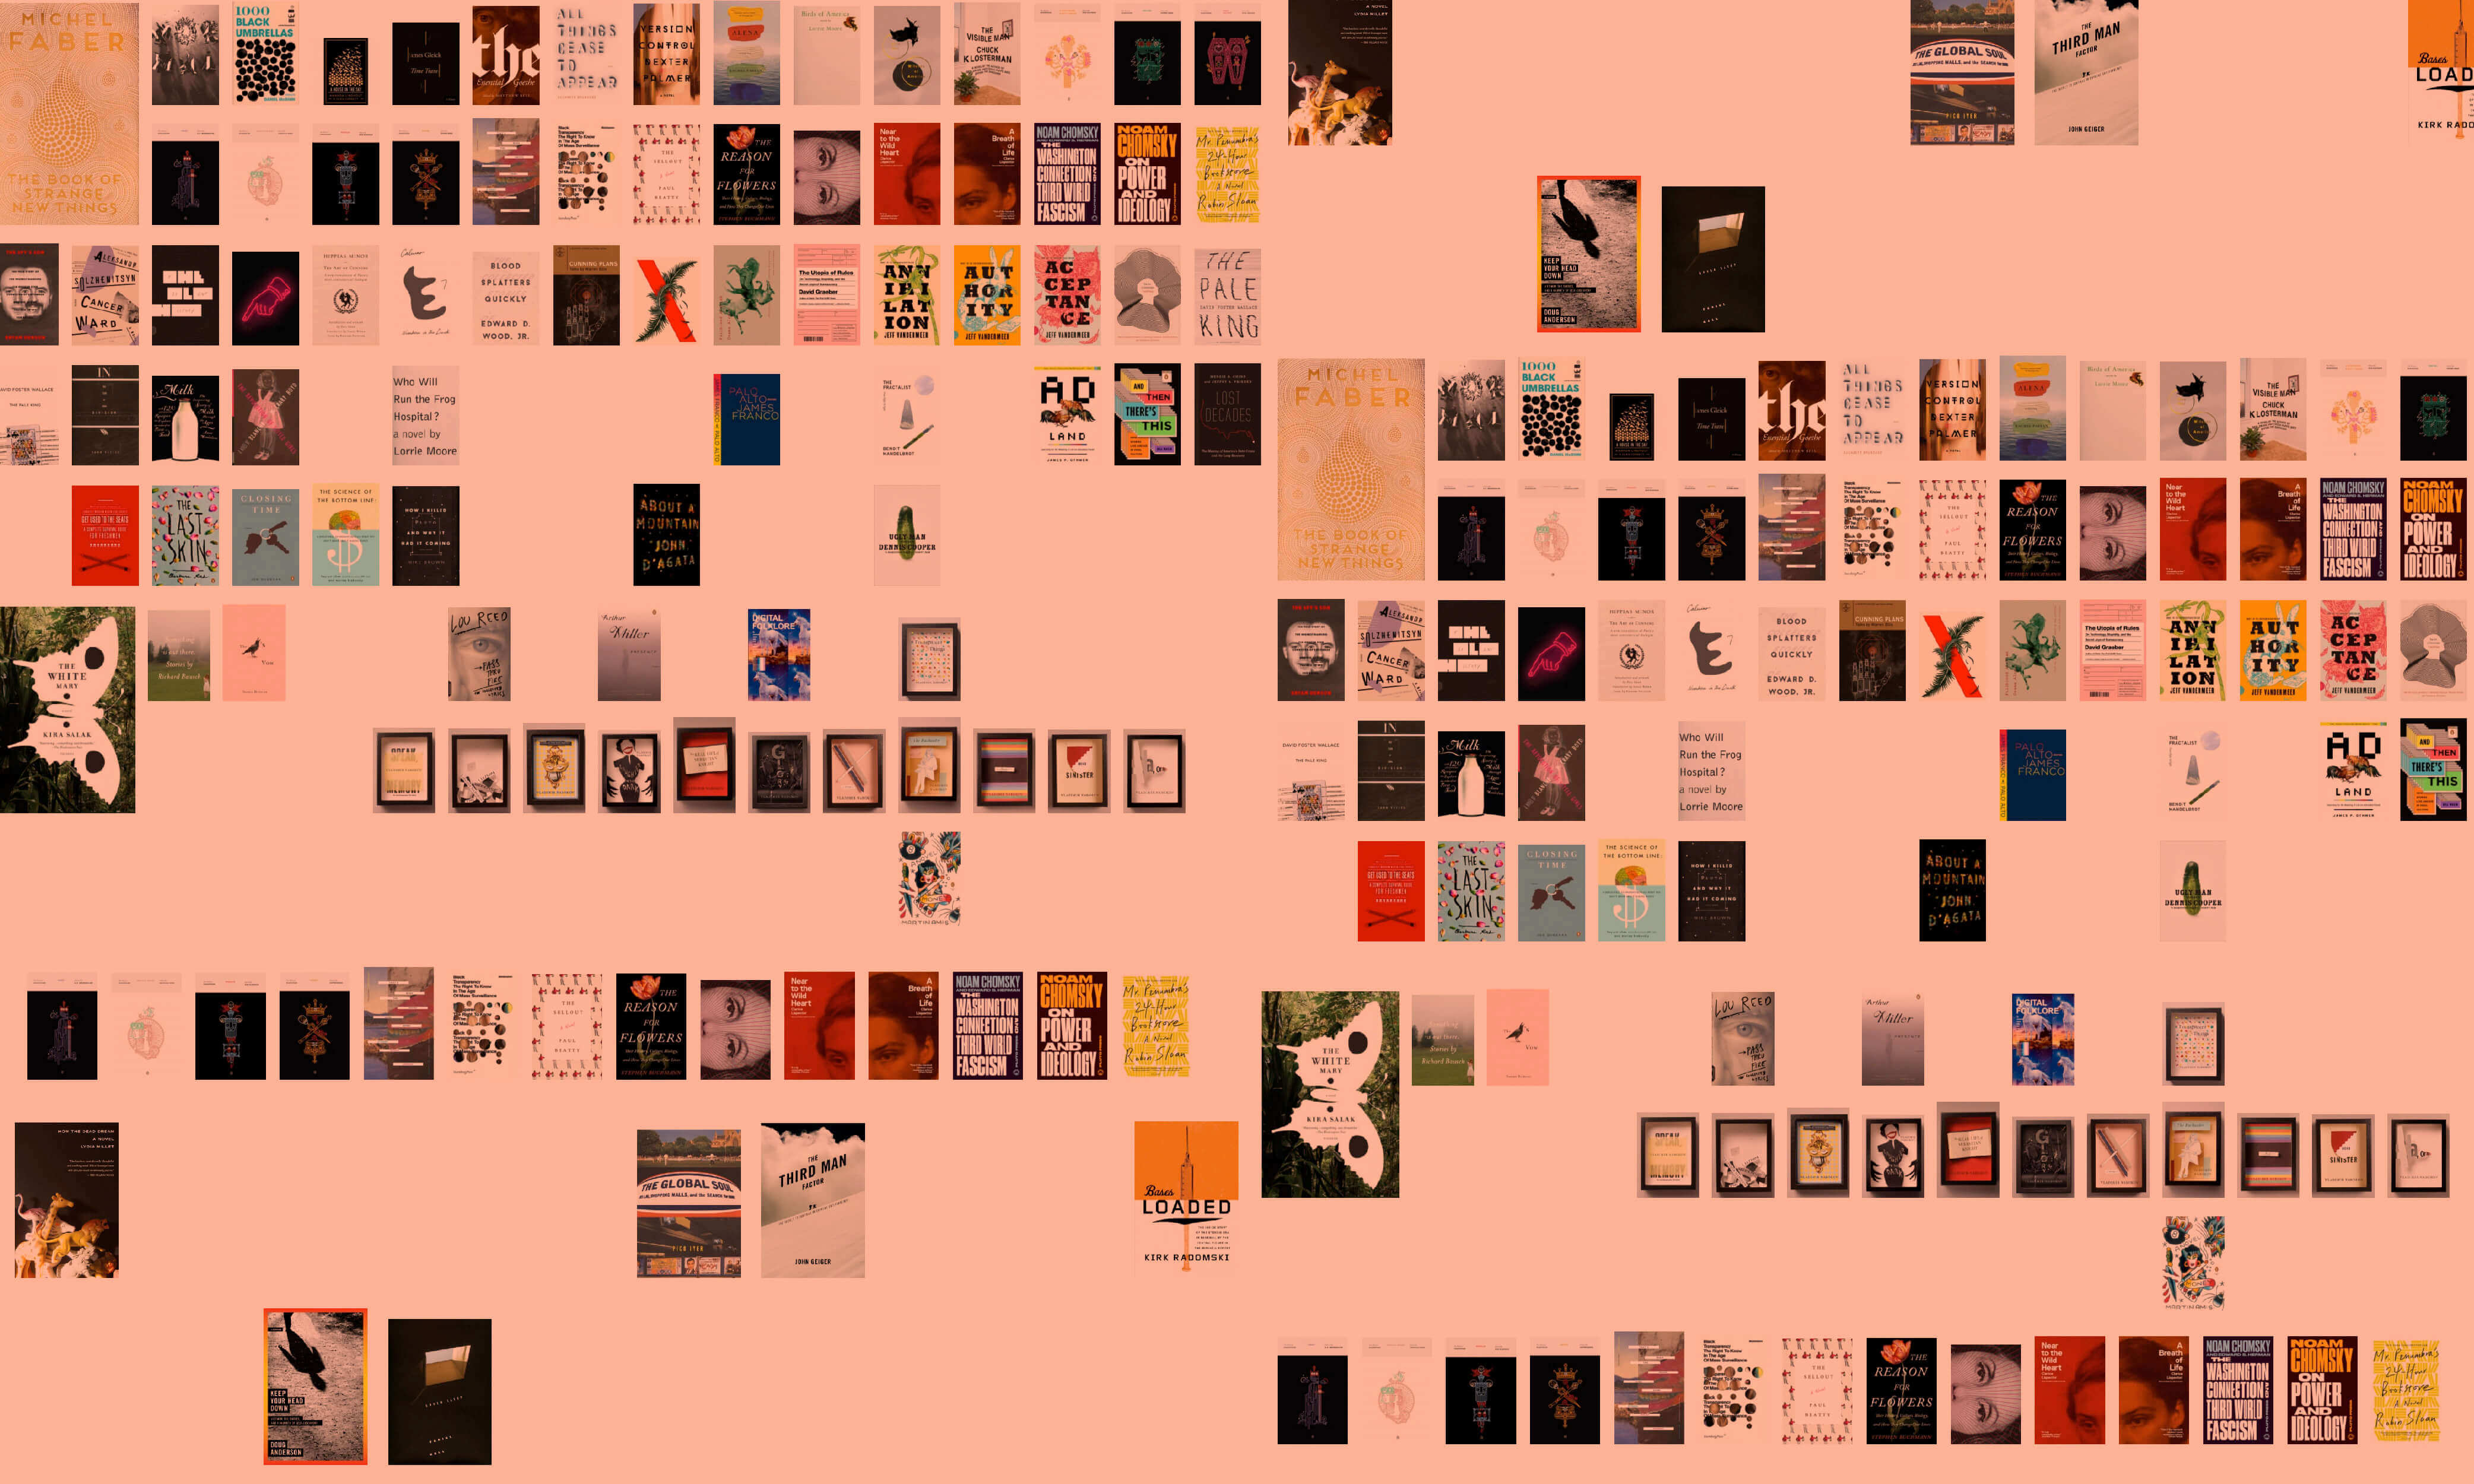 Book Cover Archive